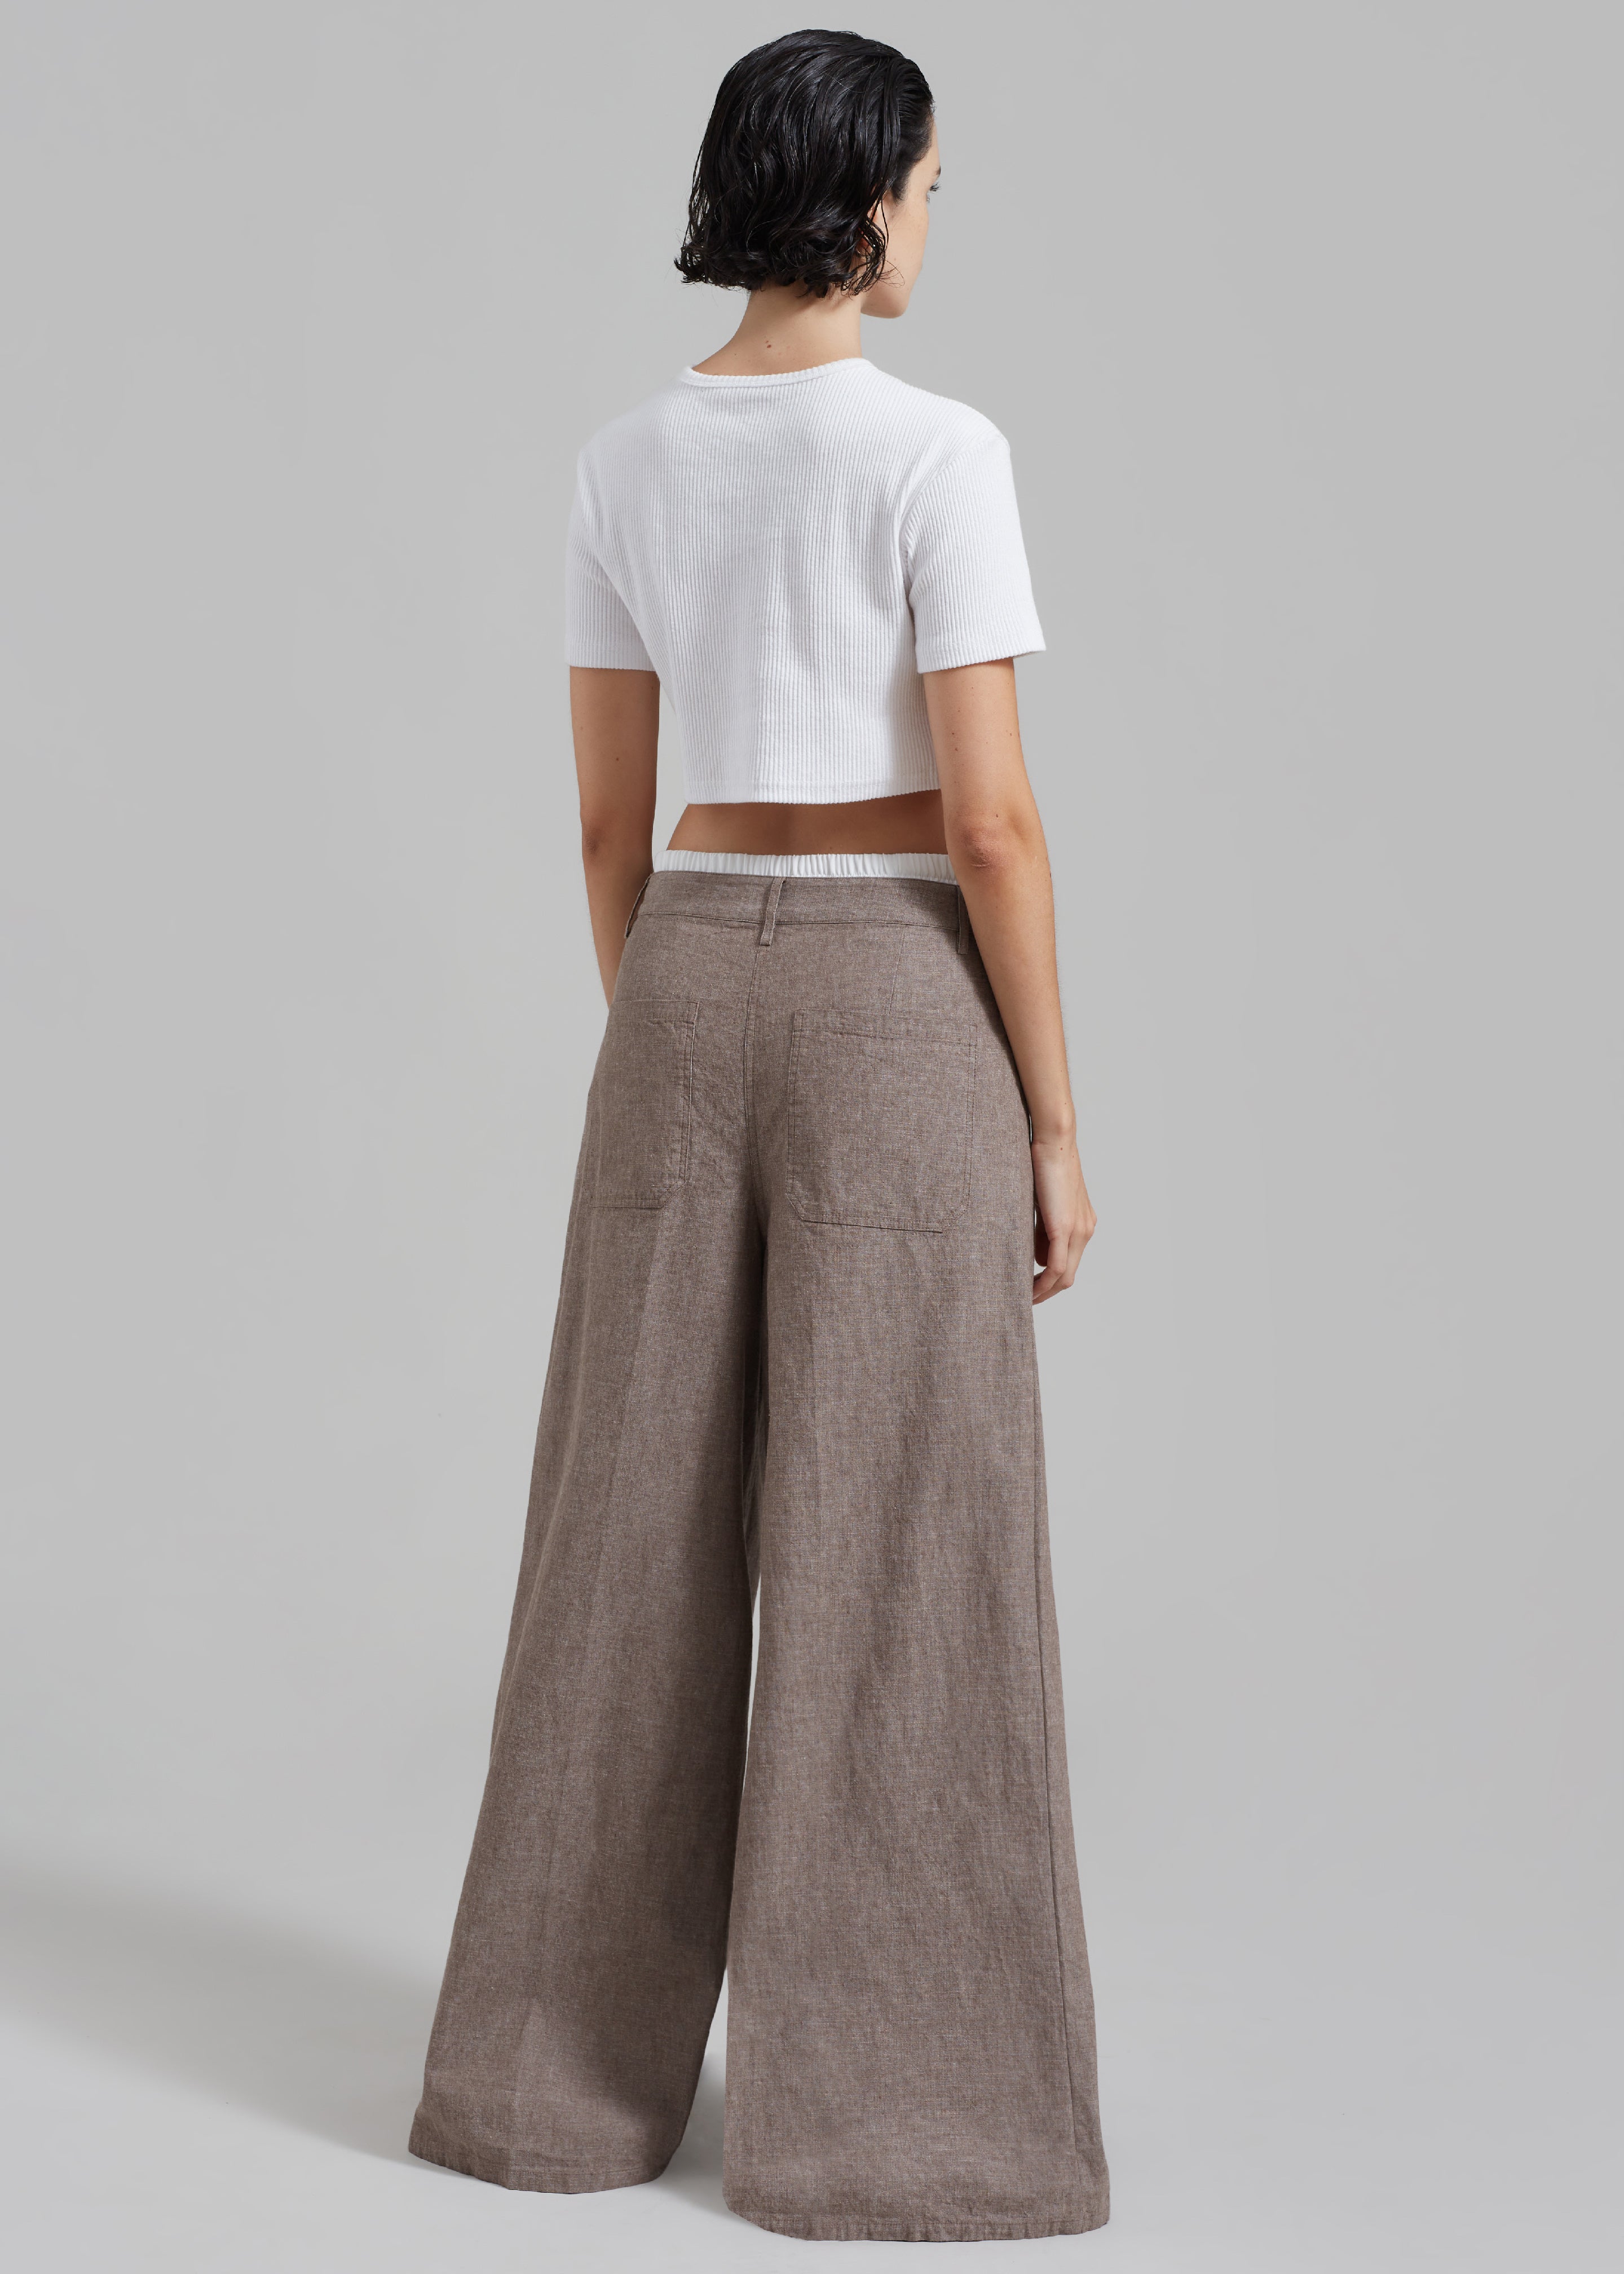 REMAIN Textured Wide Pants - Deep Taupe - 6